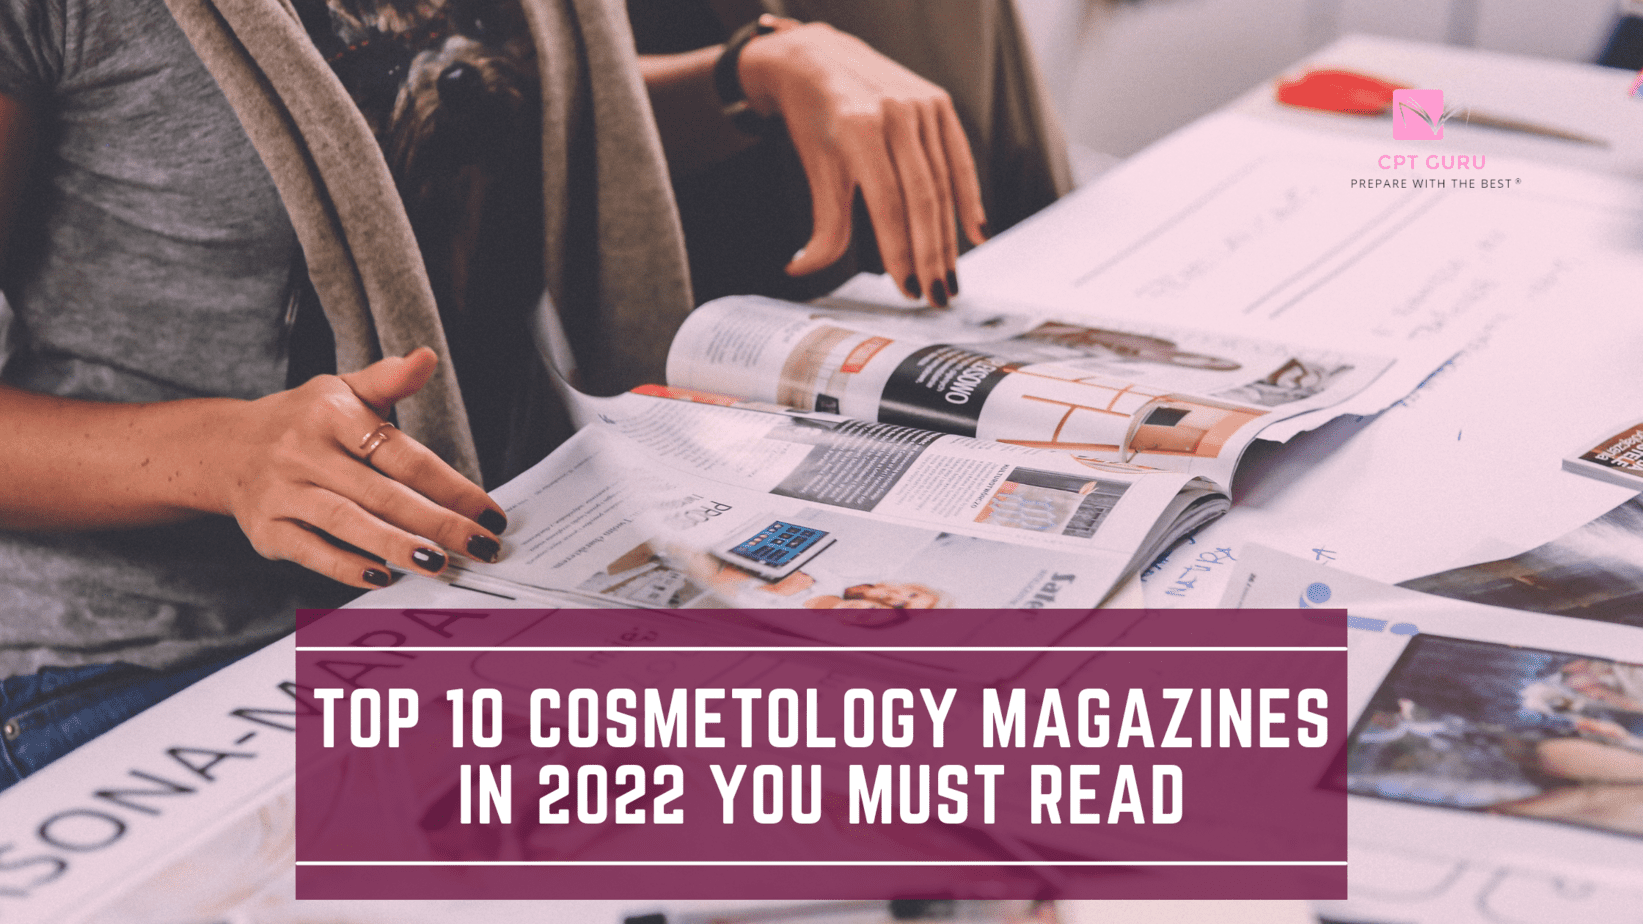 Top 10 Cosmetology Magazines in 2022 You Must Read